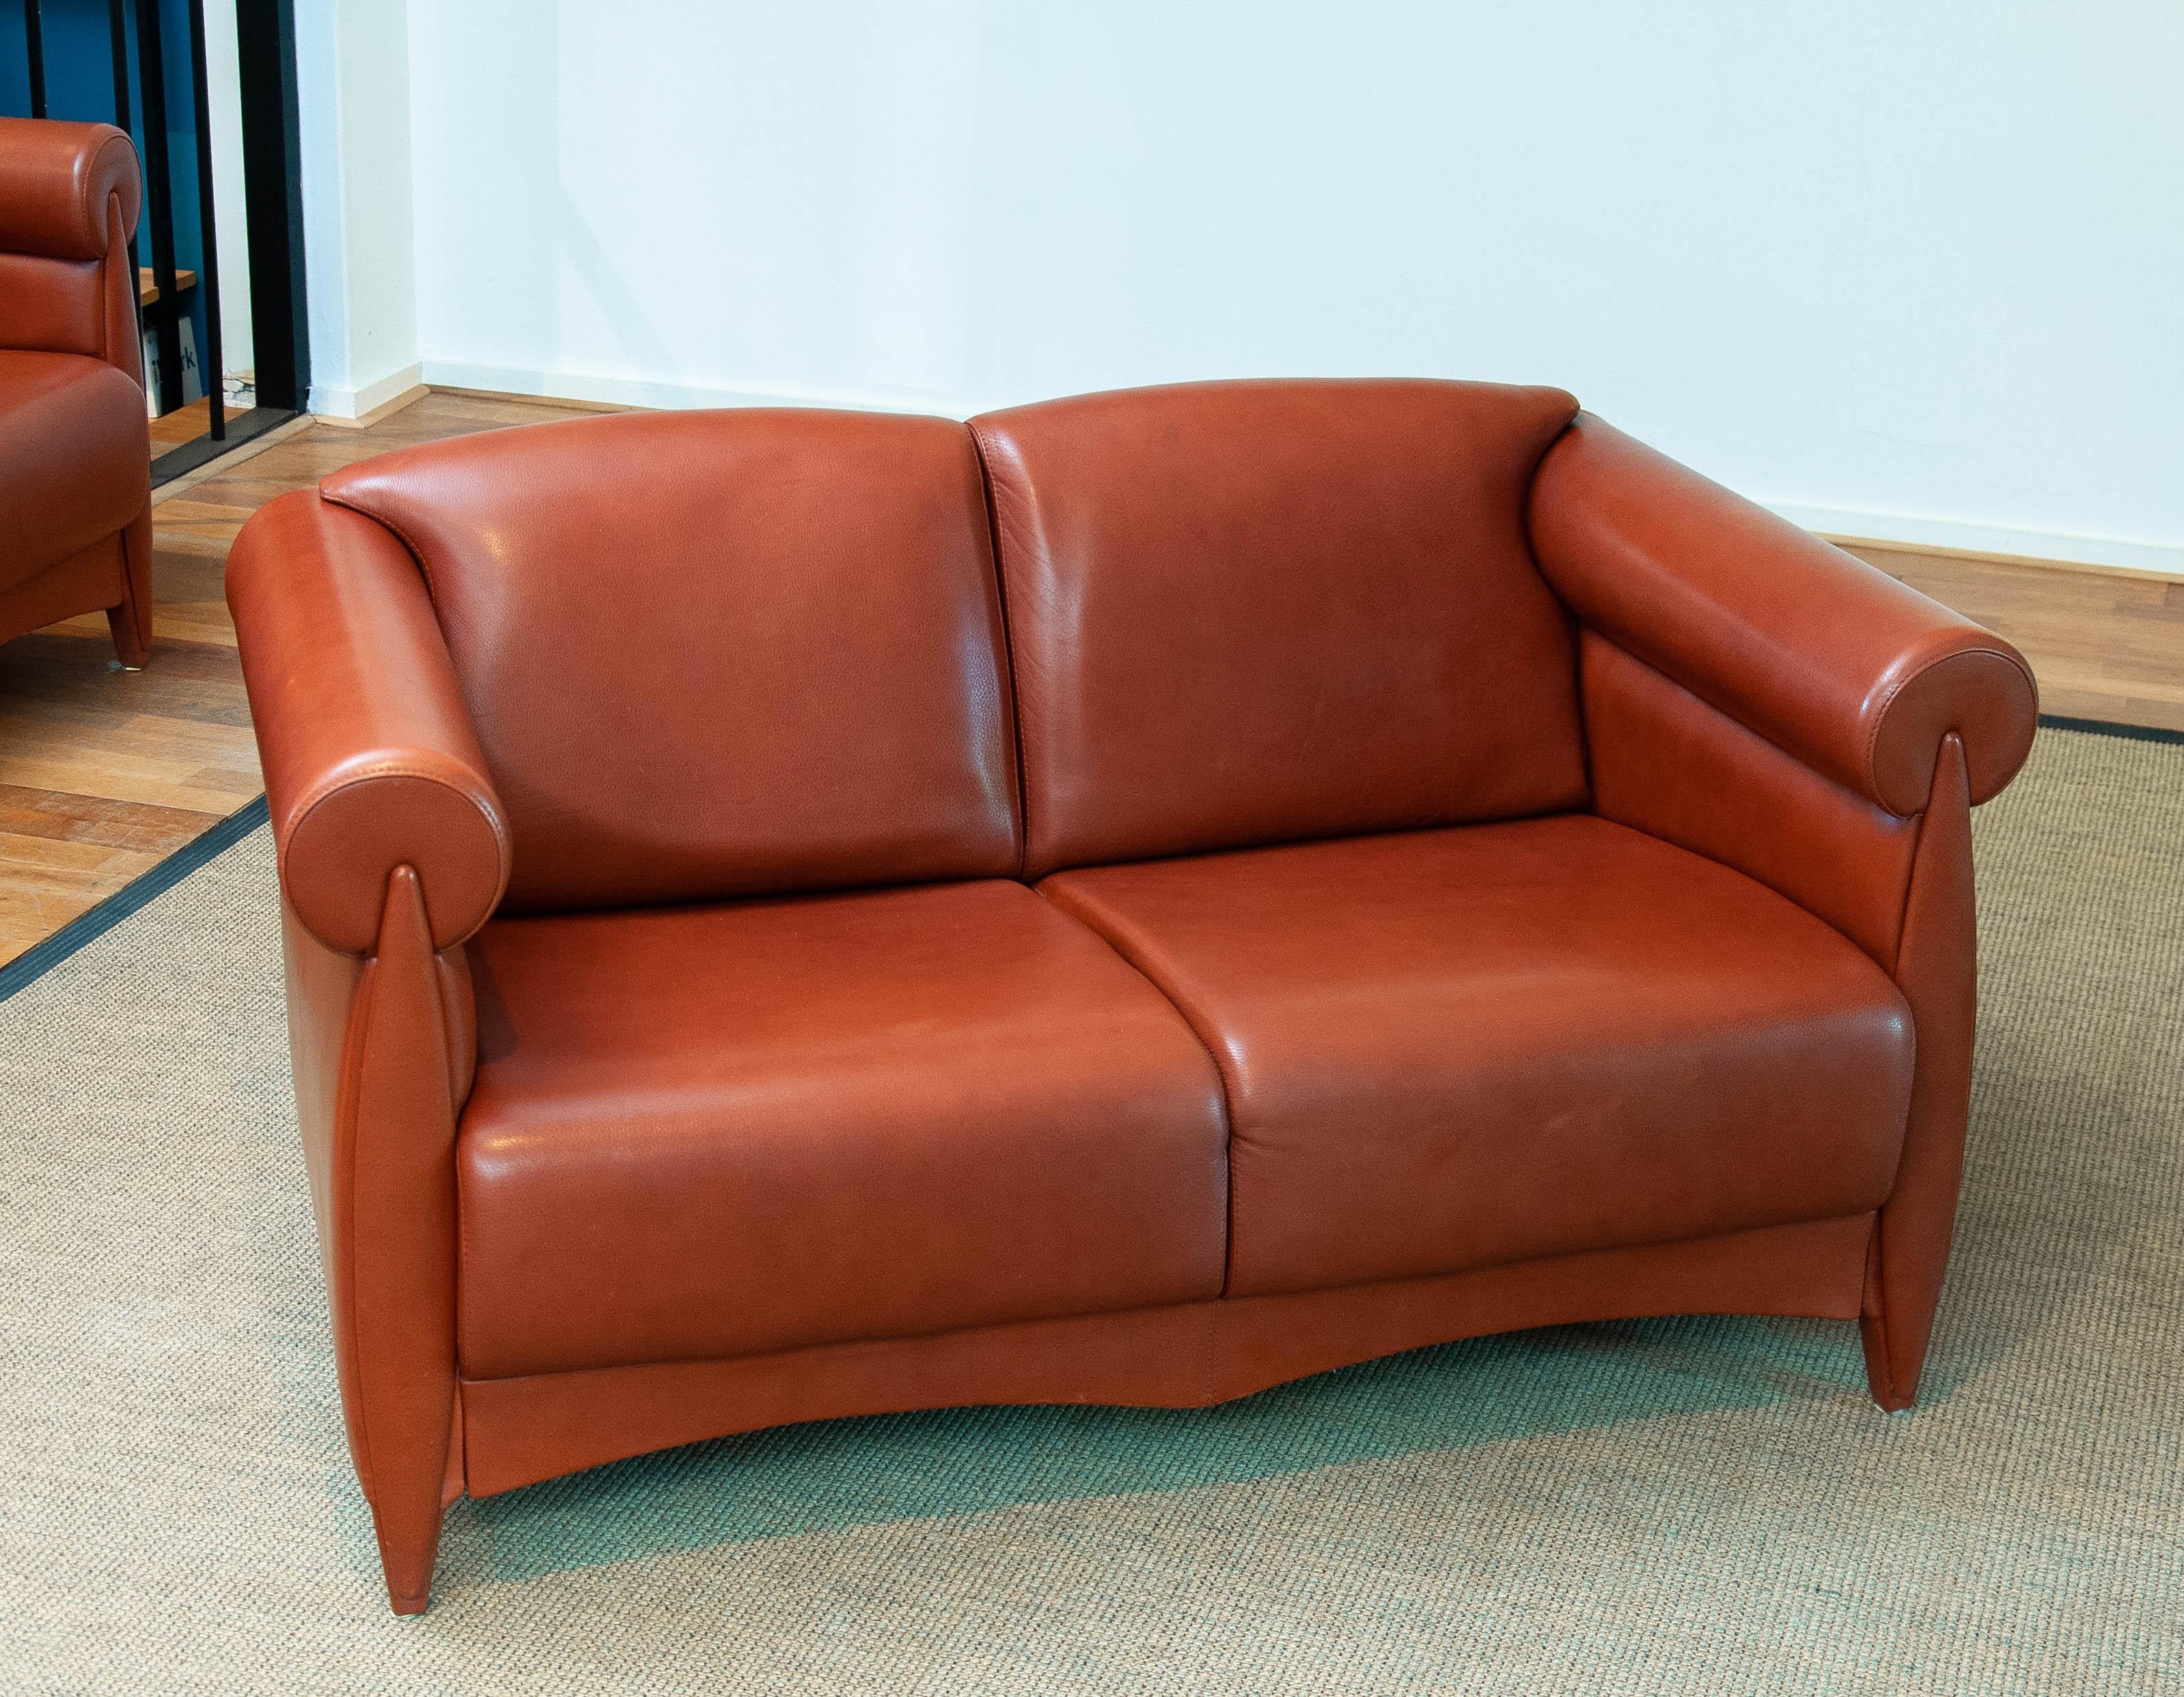 Late 20th Century 1980s Modern Two Seater Sofa in Cognac Leather by Klaus Wettergren Denmark For Sale